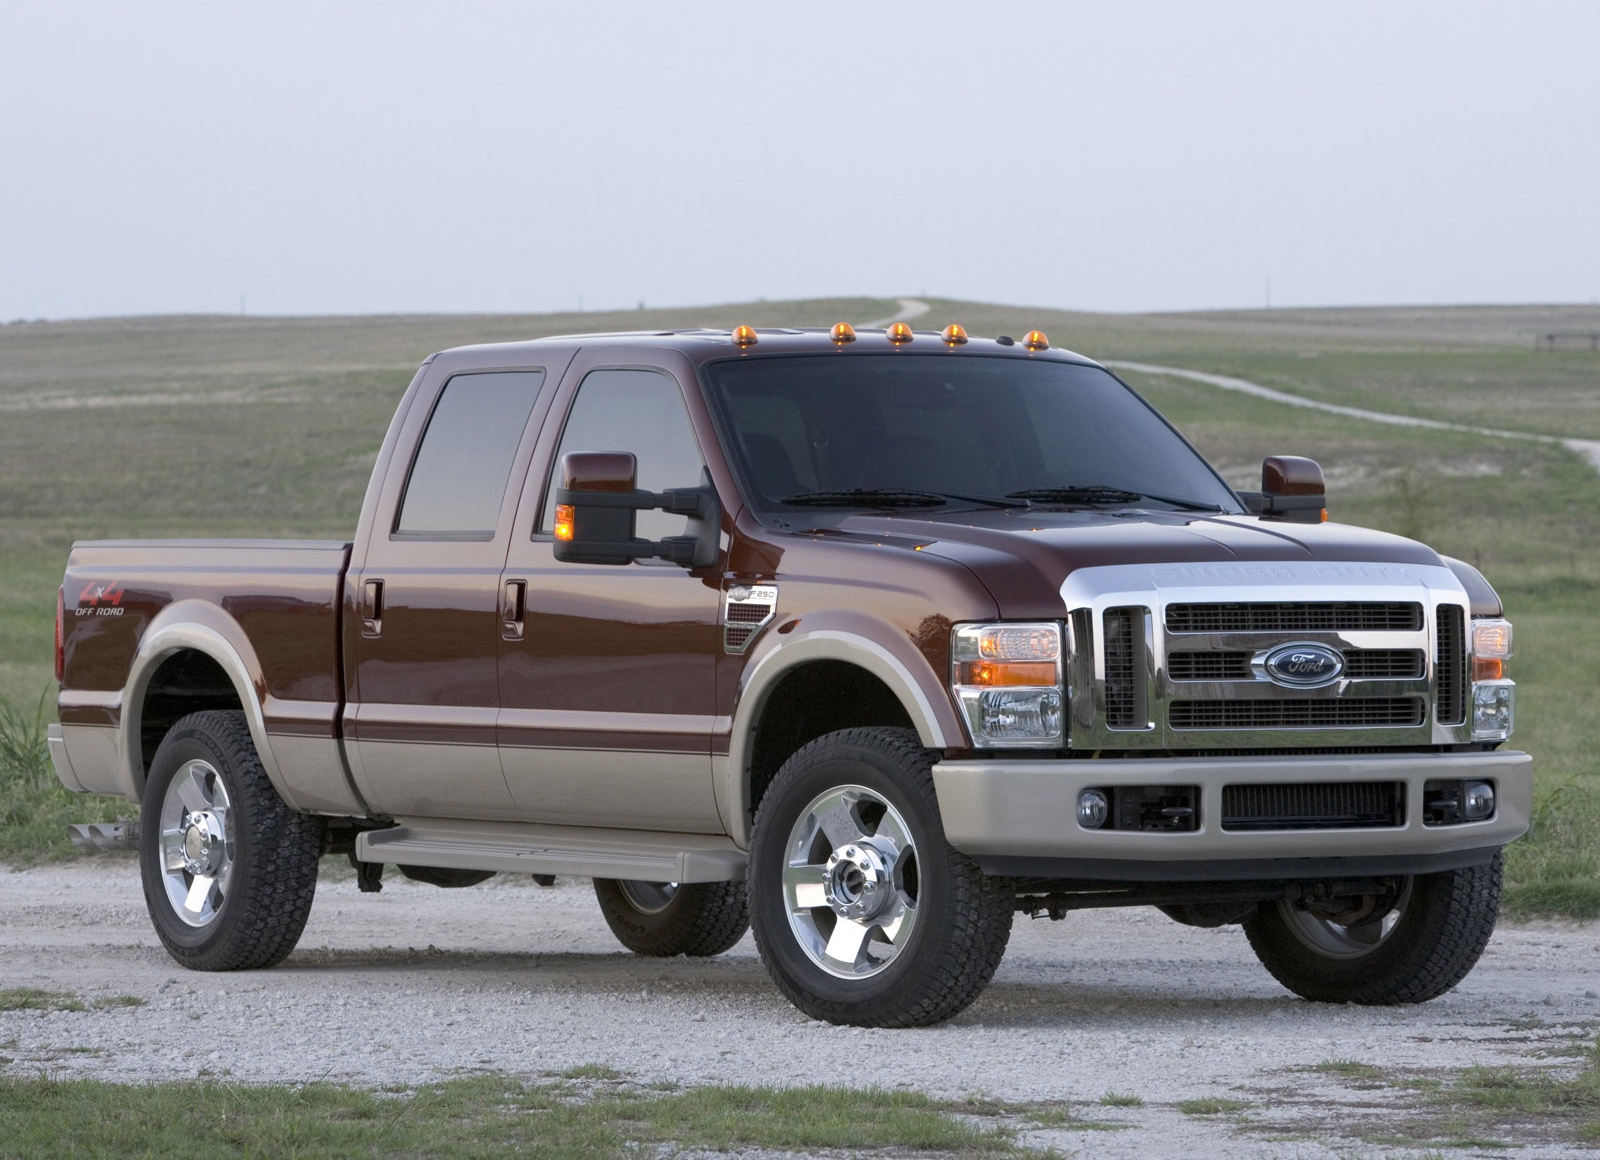 2008 Ford F-250 Super Duty Harley-Davidson Full Specs, Features and 2008 Ford F 250 Engine 5.4 L V8 Towing Capacity